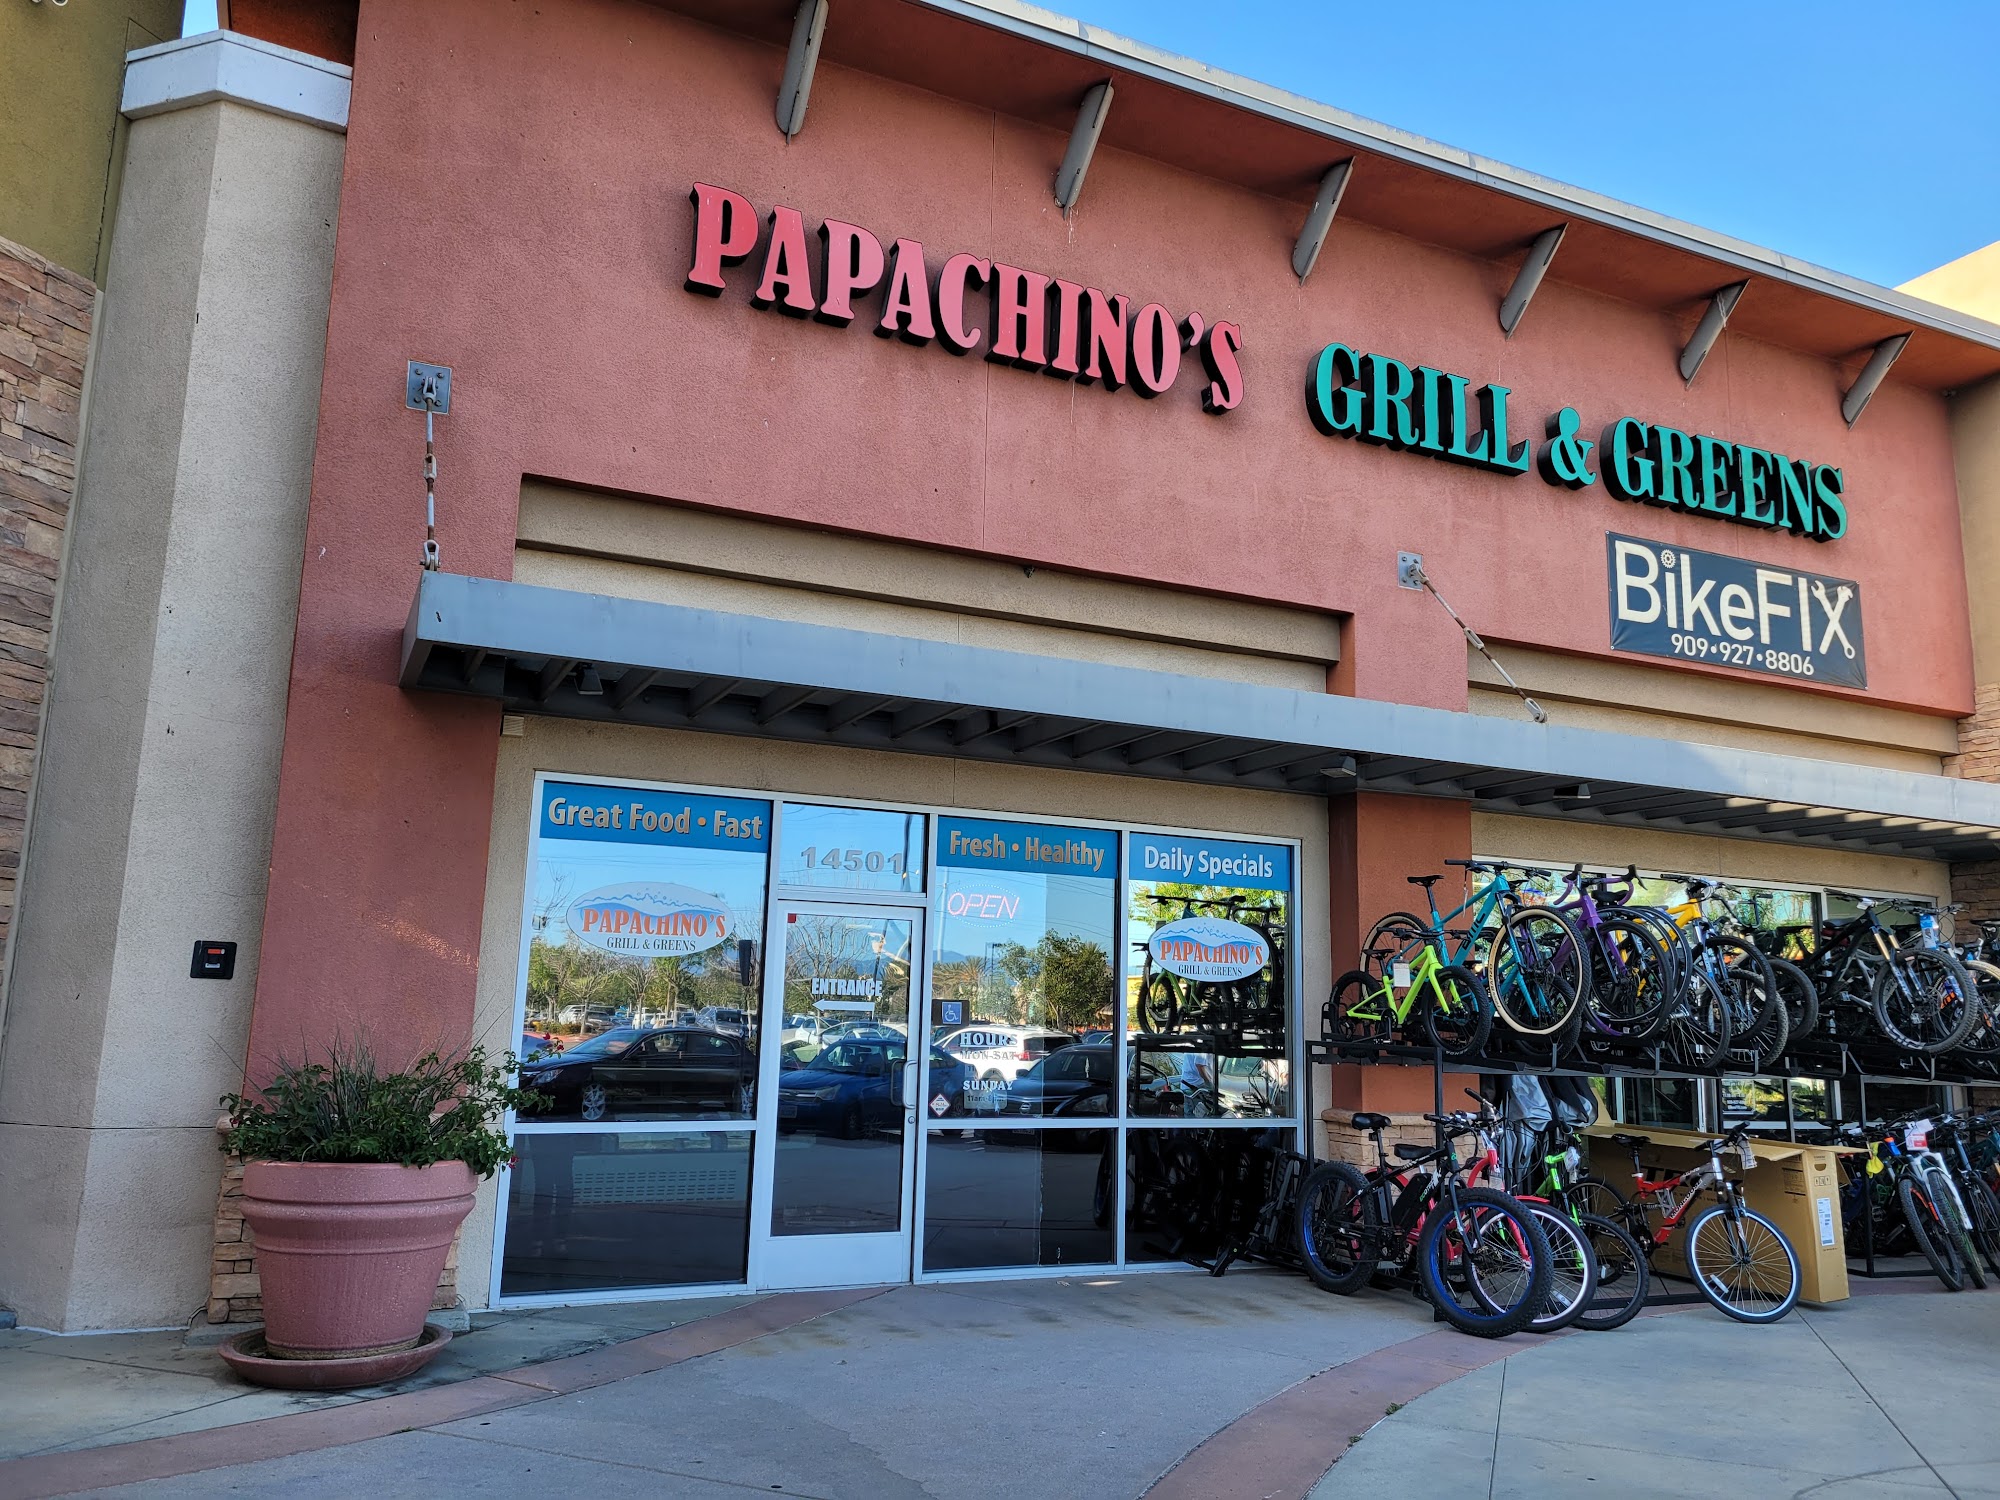 Papachino's Grill and Greens